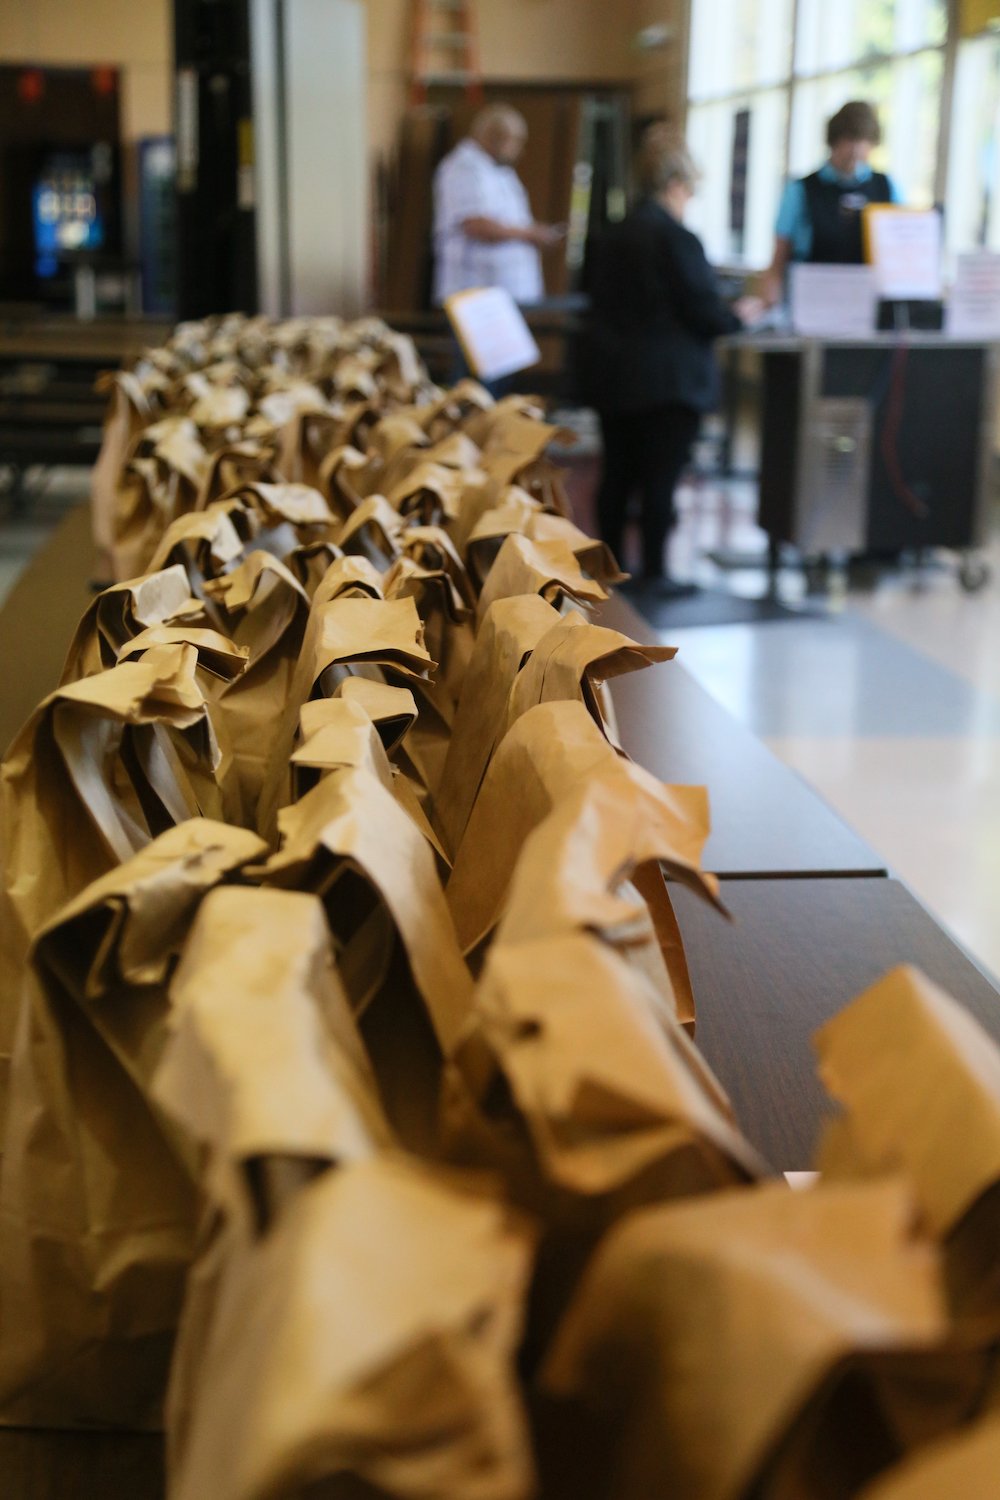 Grab-and-go lunches ready to be distributed to pick-up sites throughout the school district